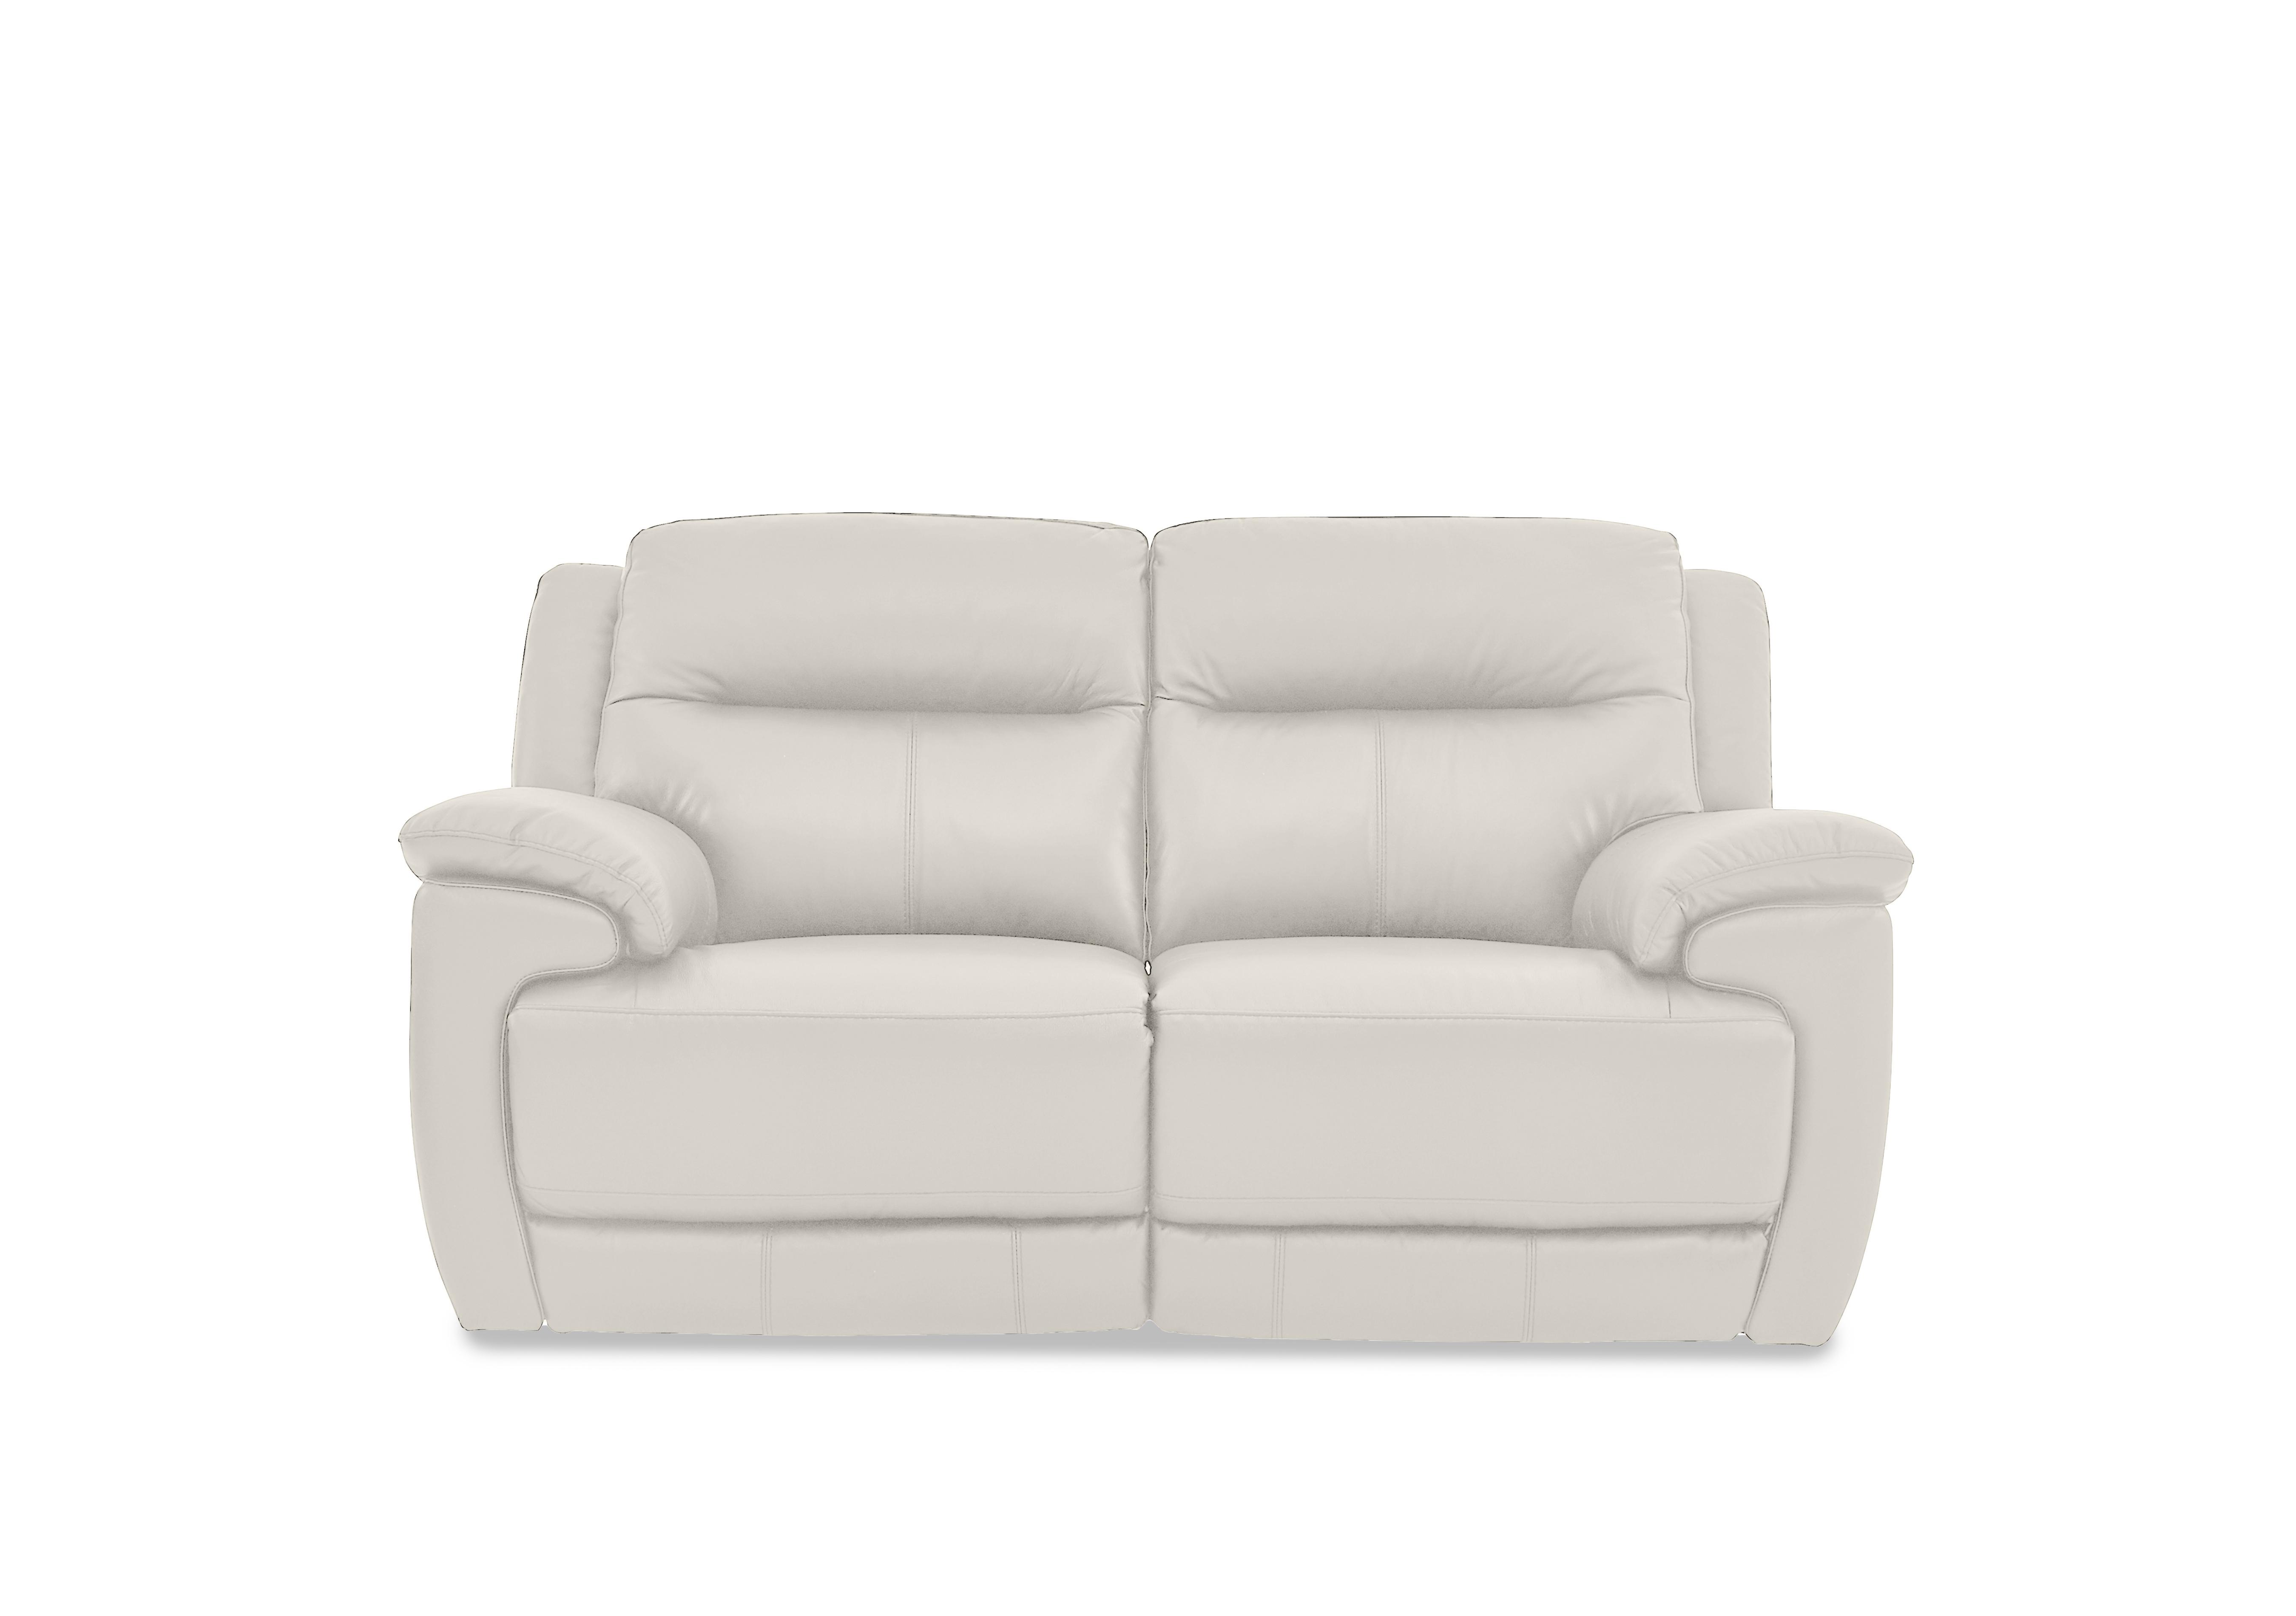 Touch 2 Seater Leather Sofa in Bv-156e Frost on Furniture Village